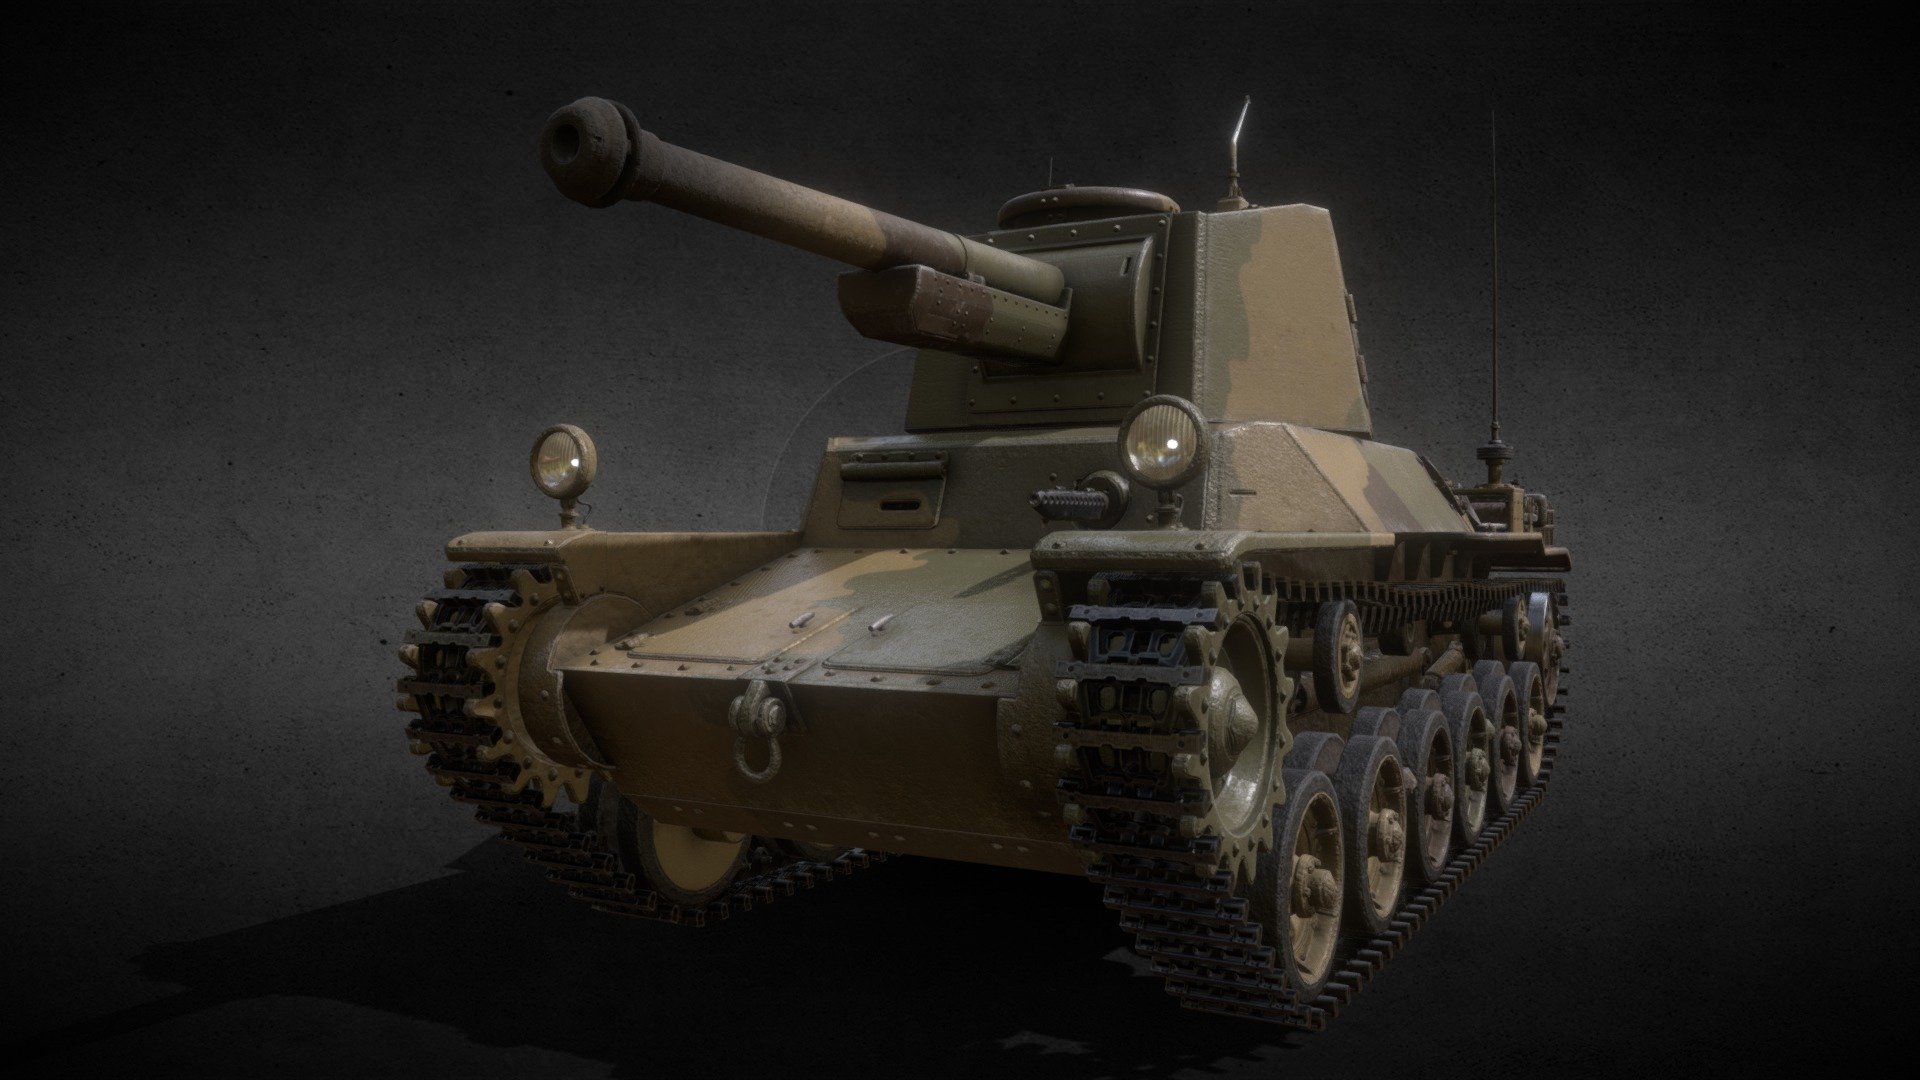 Note: this is a V.2 version of this model.

Ready to use Type 3 Chi-Nu 3D model

Type 3 Chi-Nu was based on a chassis and hull of the Type 1 Chi-He medium tank (3D model also available).
Like its predecessor, it was an improved version of the Type 97 Chi-Ha (3D model also available).
It had a 75 mm main gun, one of the largest Japanese guns used in Japanese tanks of the WW2.
With only 144 to 166 units built, the Chi-Nu did not see combat.
All units were retained for the defense of the Japanese home islands in expected Allied invasion.

Camouflage paint variant.

Ready to use in games or renders.

More Japanese WW II models in the collection: https://skfb.ly/oyoDN

More Tanks and Parts models in the collection: https://skfb.ly/oyoDV

More cheap or free military models in the collection: https://skfb.ly/ooYNo

texture sets:




8K for hull

8K for turret

8K for chassis

1K for tracks
 - Type 3 Chi-Nu (IJA Medium Tank) V.2 - Buy Royalty Free 3D model by AdamKozakGrafika 3d model